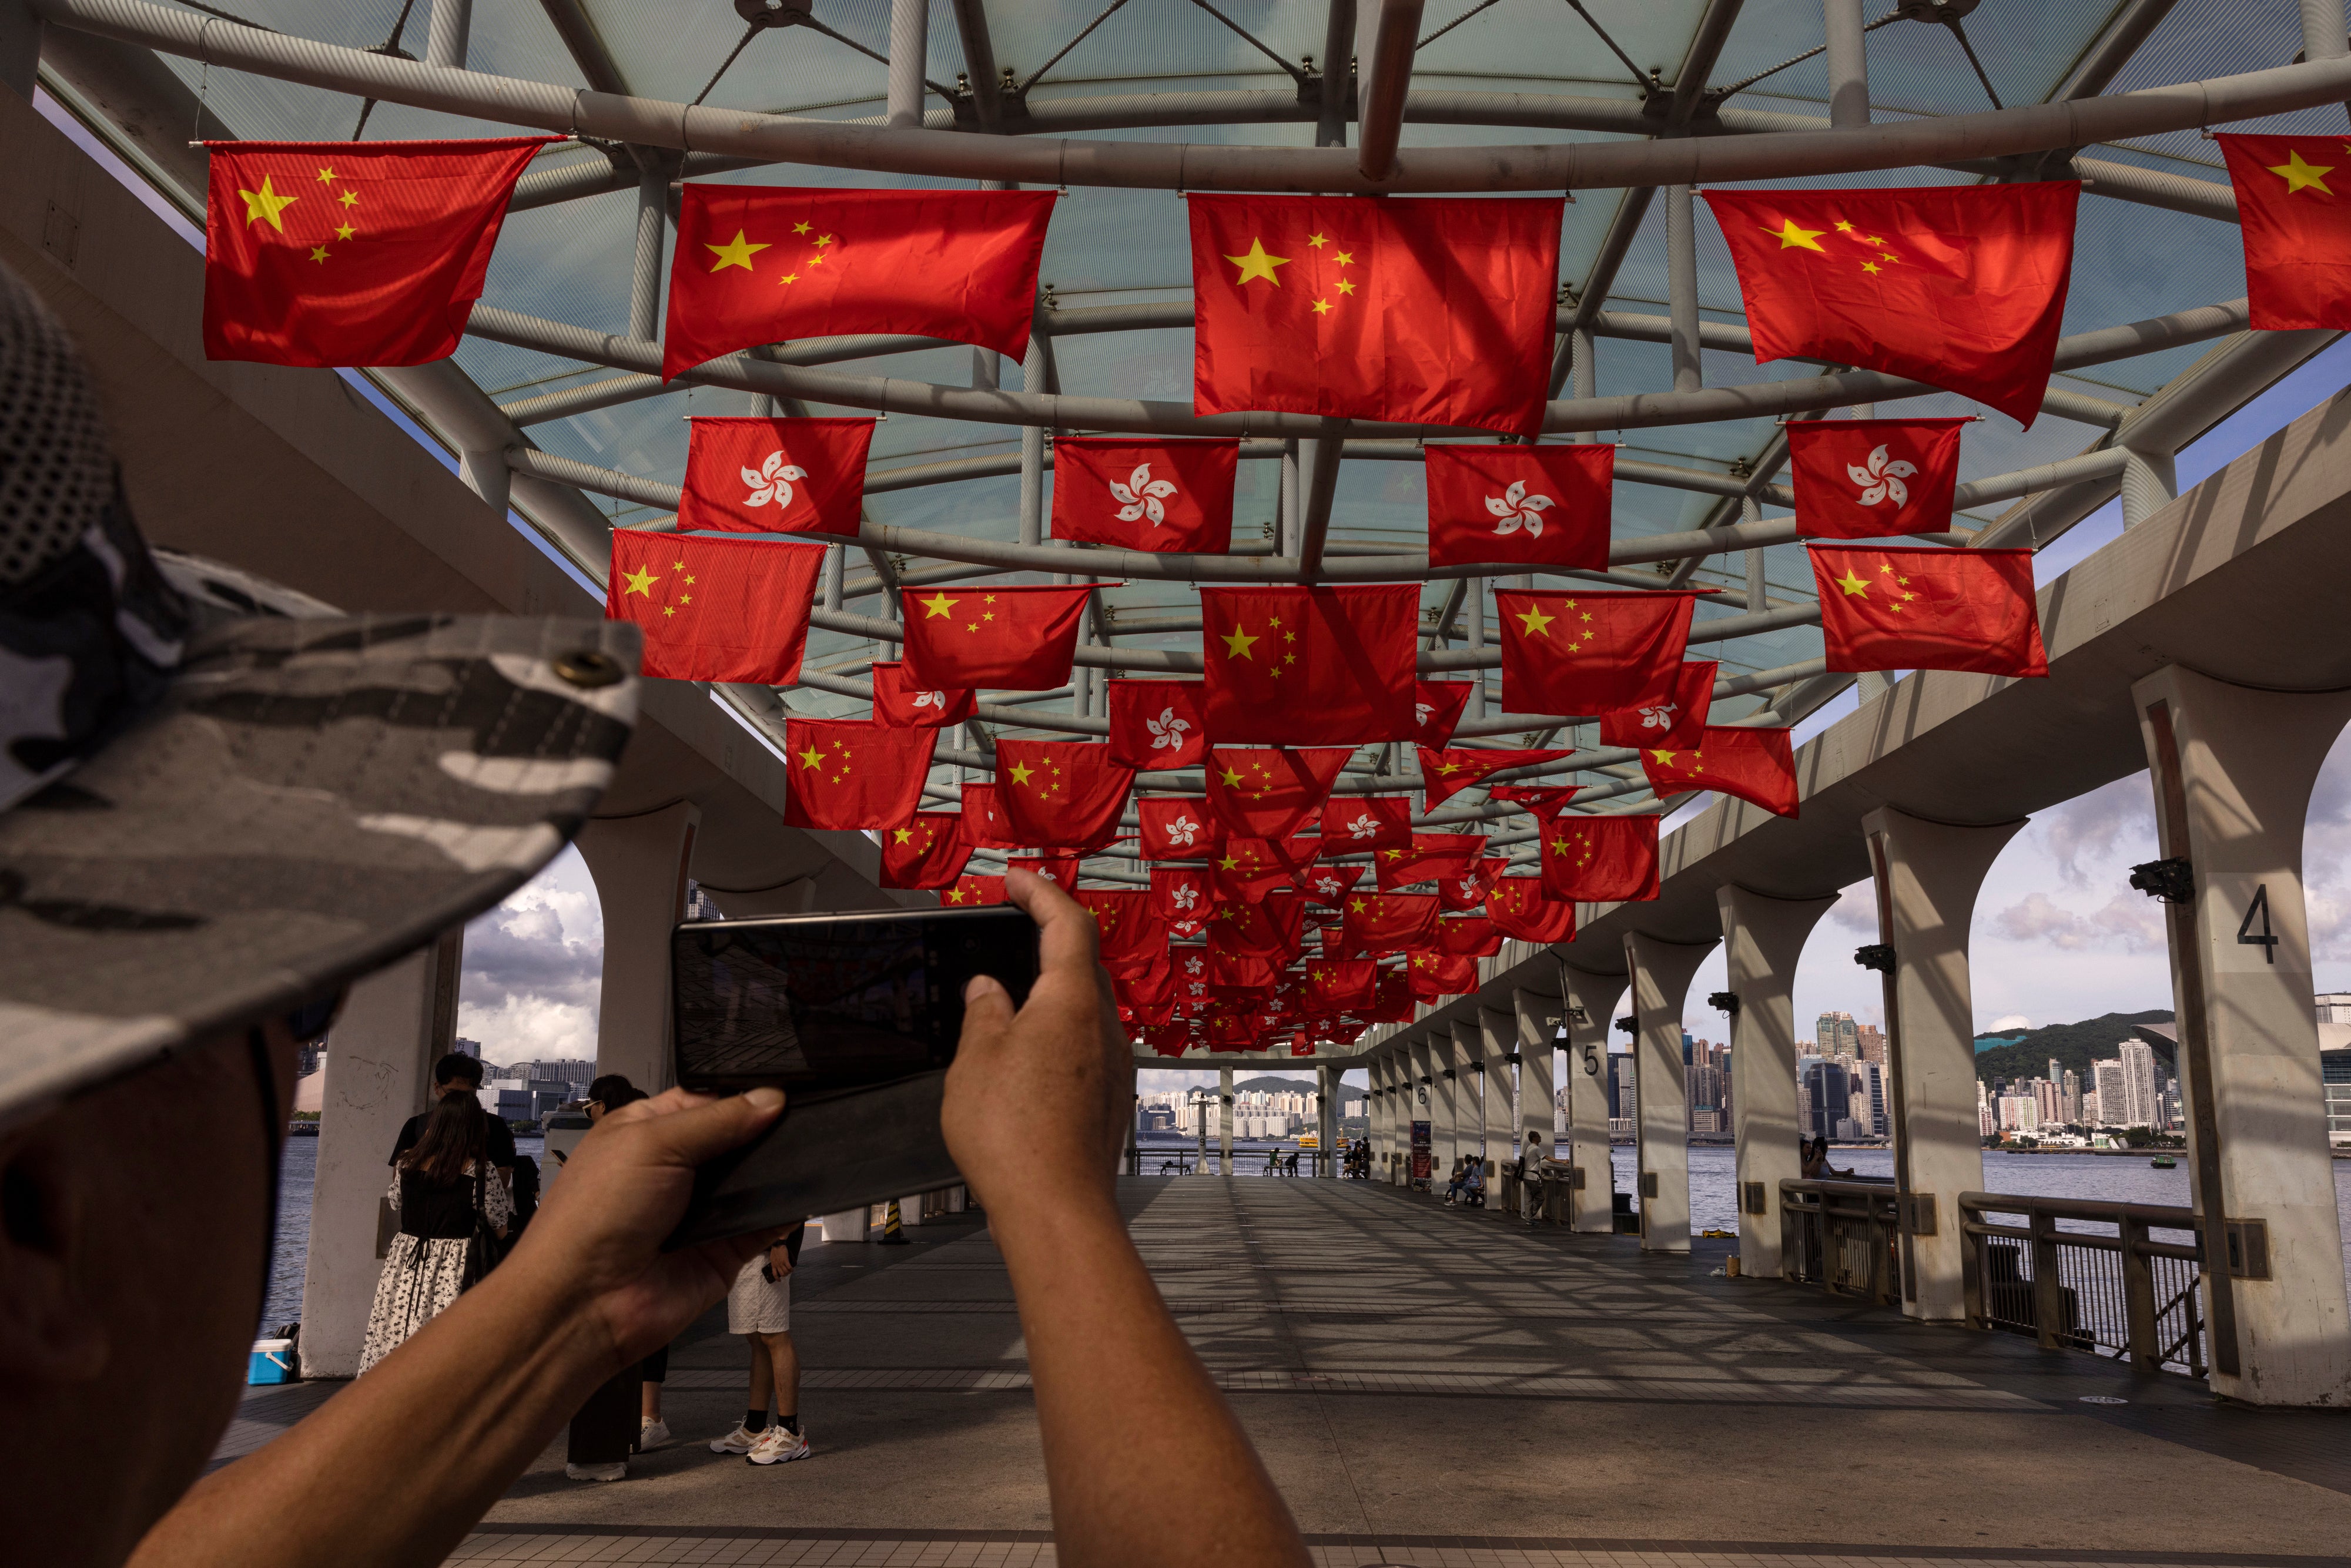 File. Mainland Chinese tourists take photographs as Chinese and Hong Kong flags are strung to mark the 26th anniversary of the city’s handover from Britain to China in Hong Kong, on June 27, 2023. A Japanese journalist was barred from entering Hong Kong without a clear reason and was sent back to his country, a Japanese newspaper reported Friday, 30 June 2023 raising concerns over the city’s shrinking press freedoms